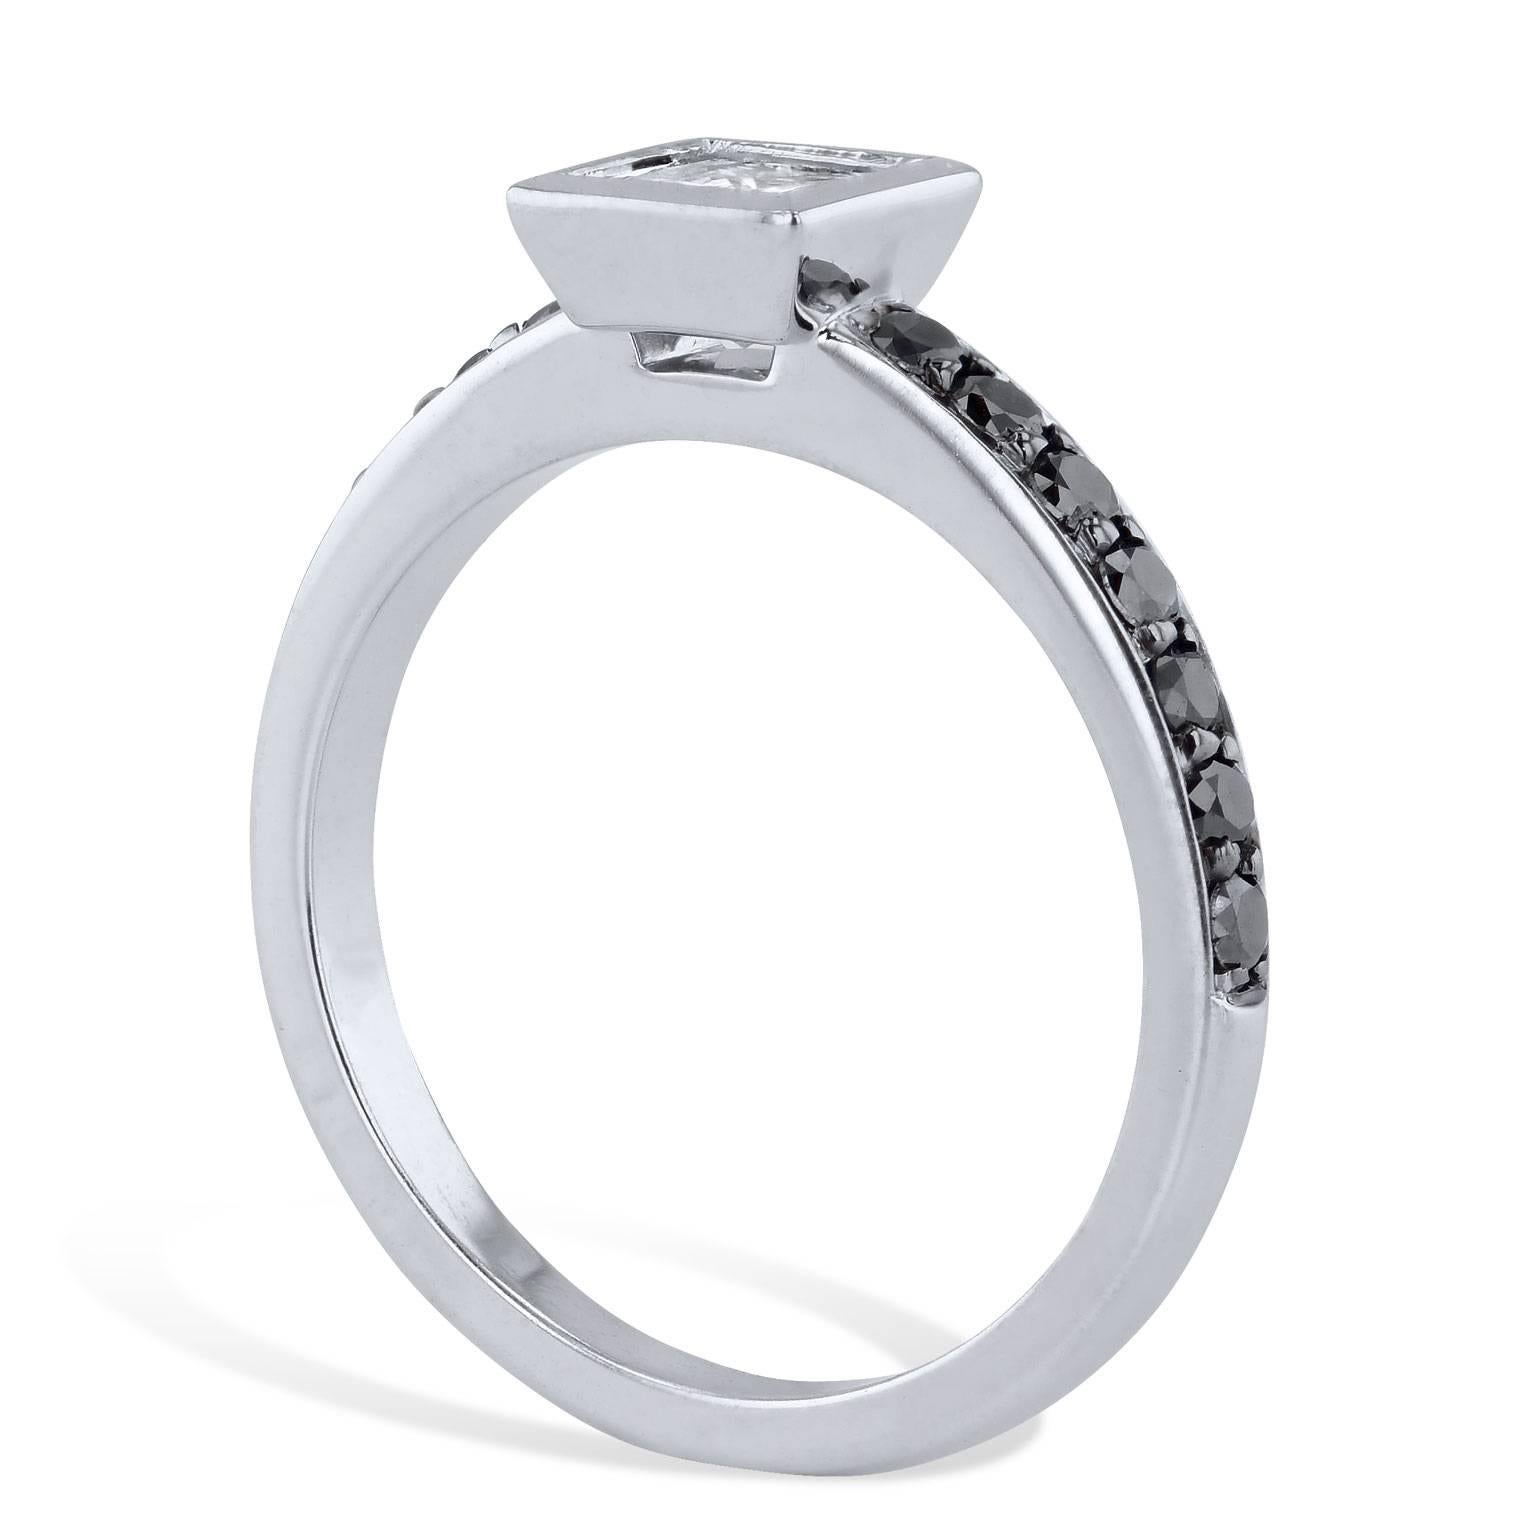 0.58 Carat Princess Cut Diamond with Black Diamond Pave Engagement Ring Size 6.5

Black and white diamonds, like keys of piano playing a melody that guides you straight to her heart, come together in this handmade 14 karat white gold engagement